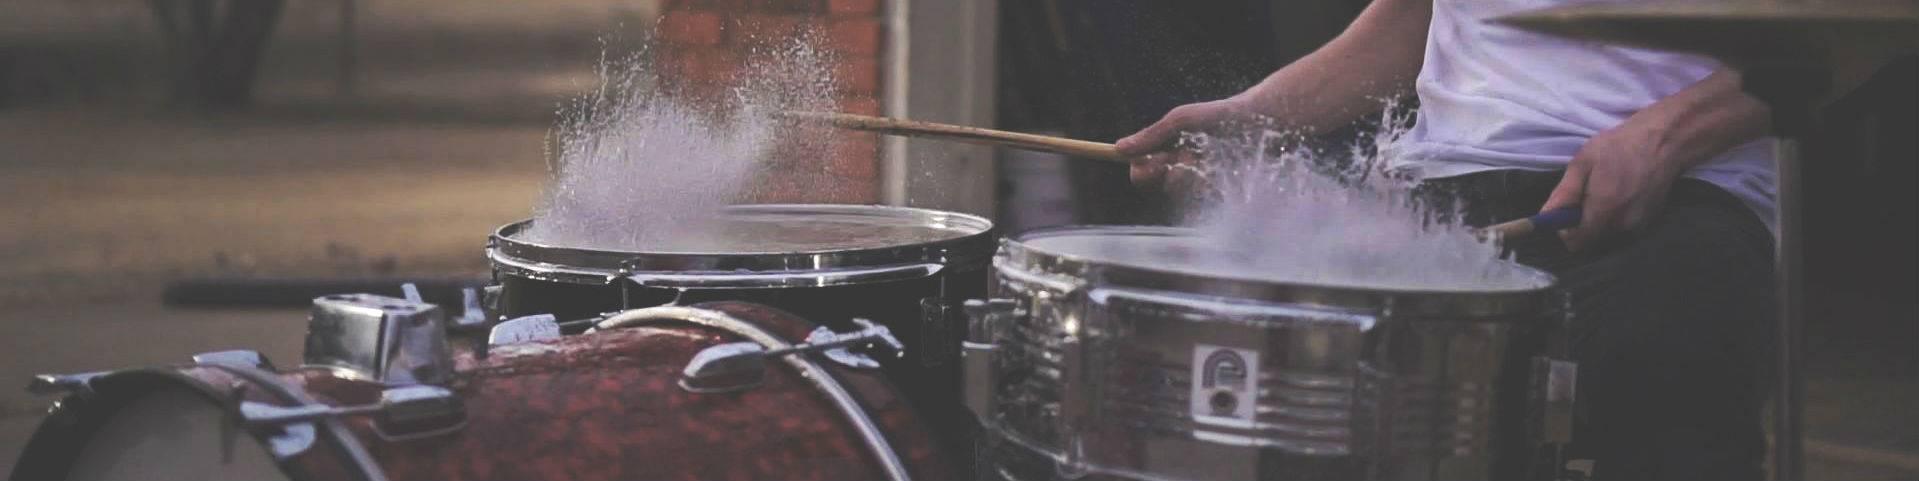 A drummer playing wet drums that are splashing